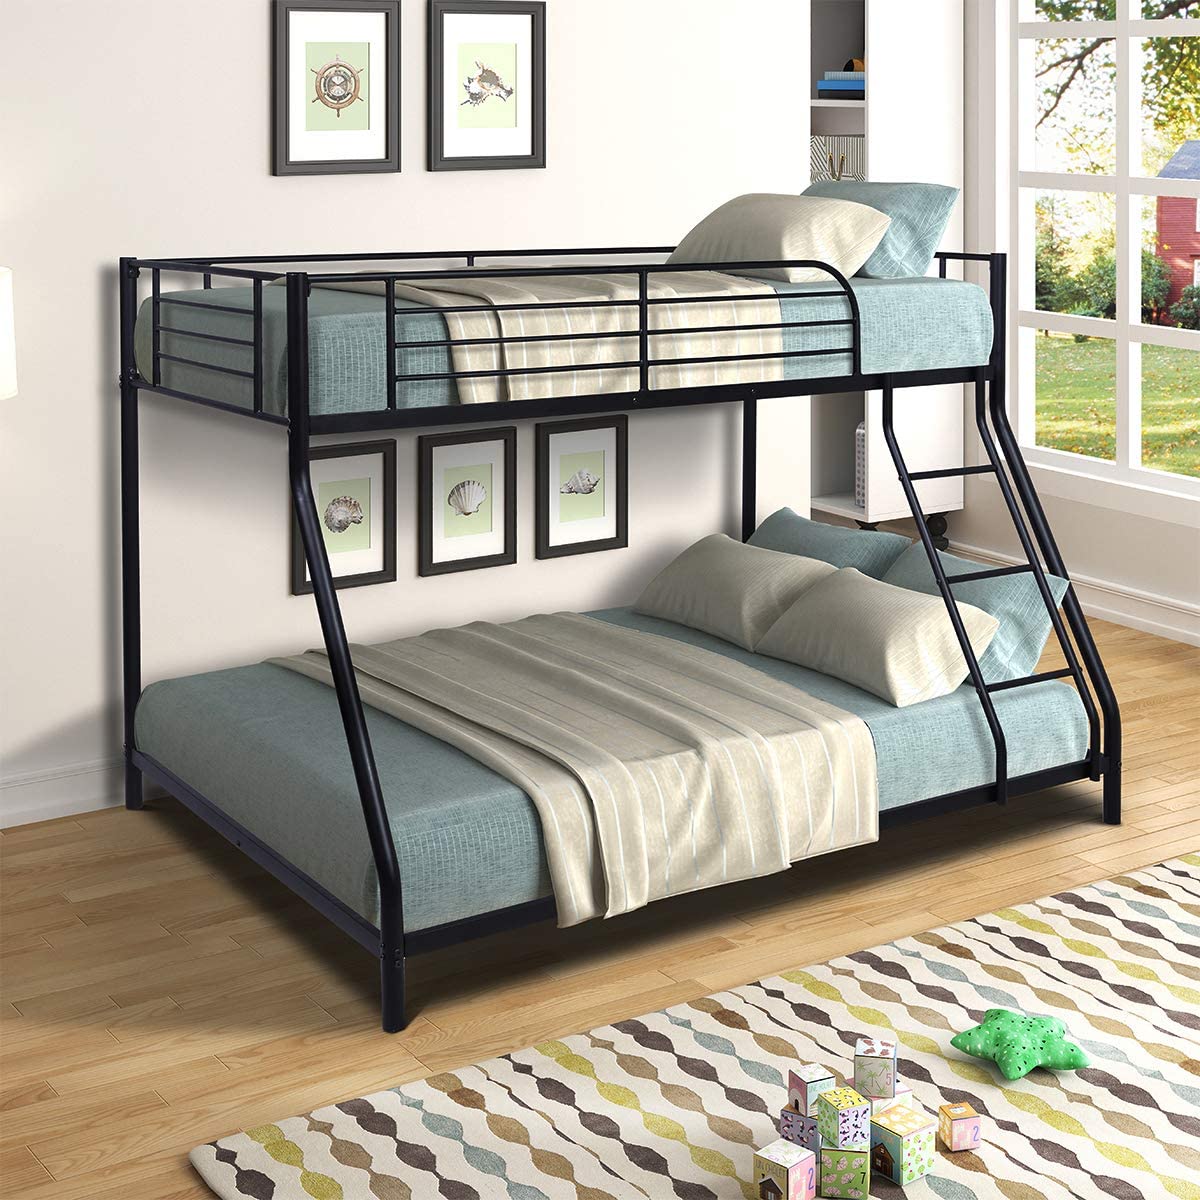 HUAYICUN Inclined Ladder Space-Saving Kids’ Bunk Bed